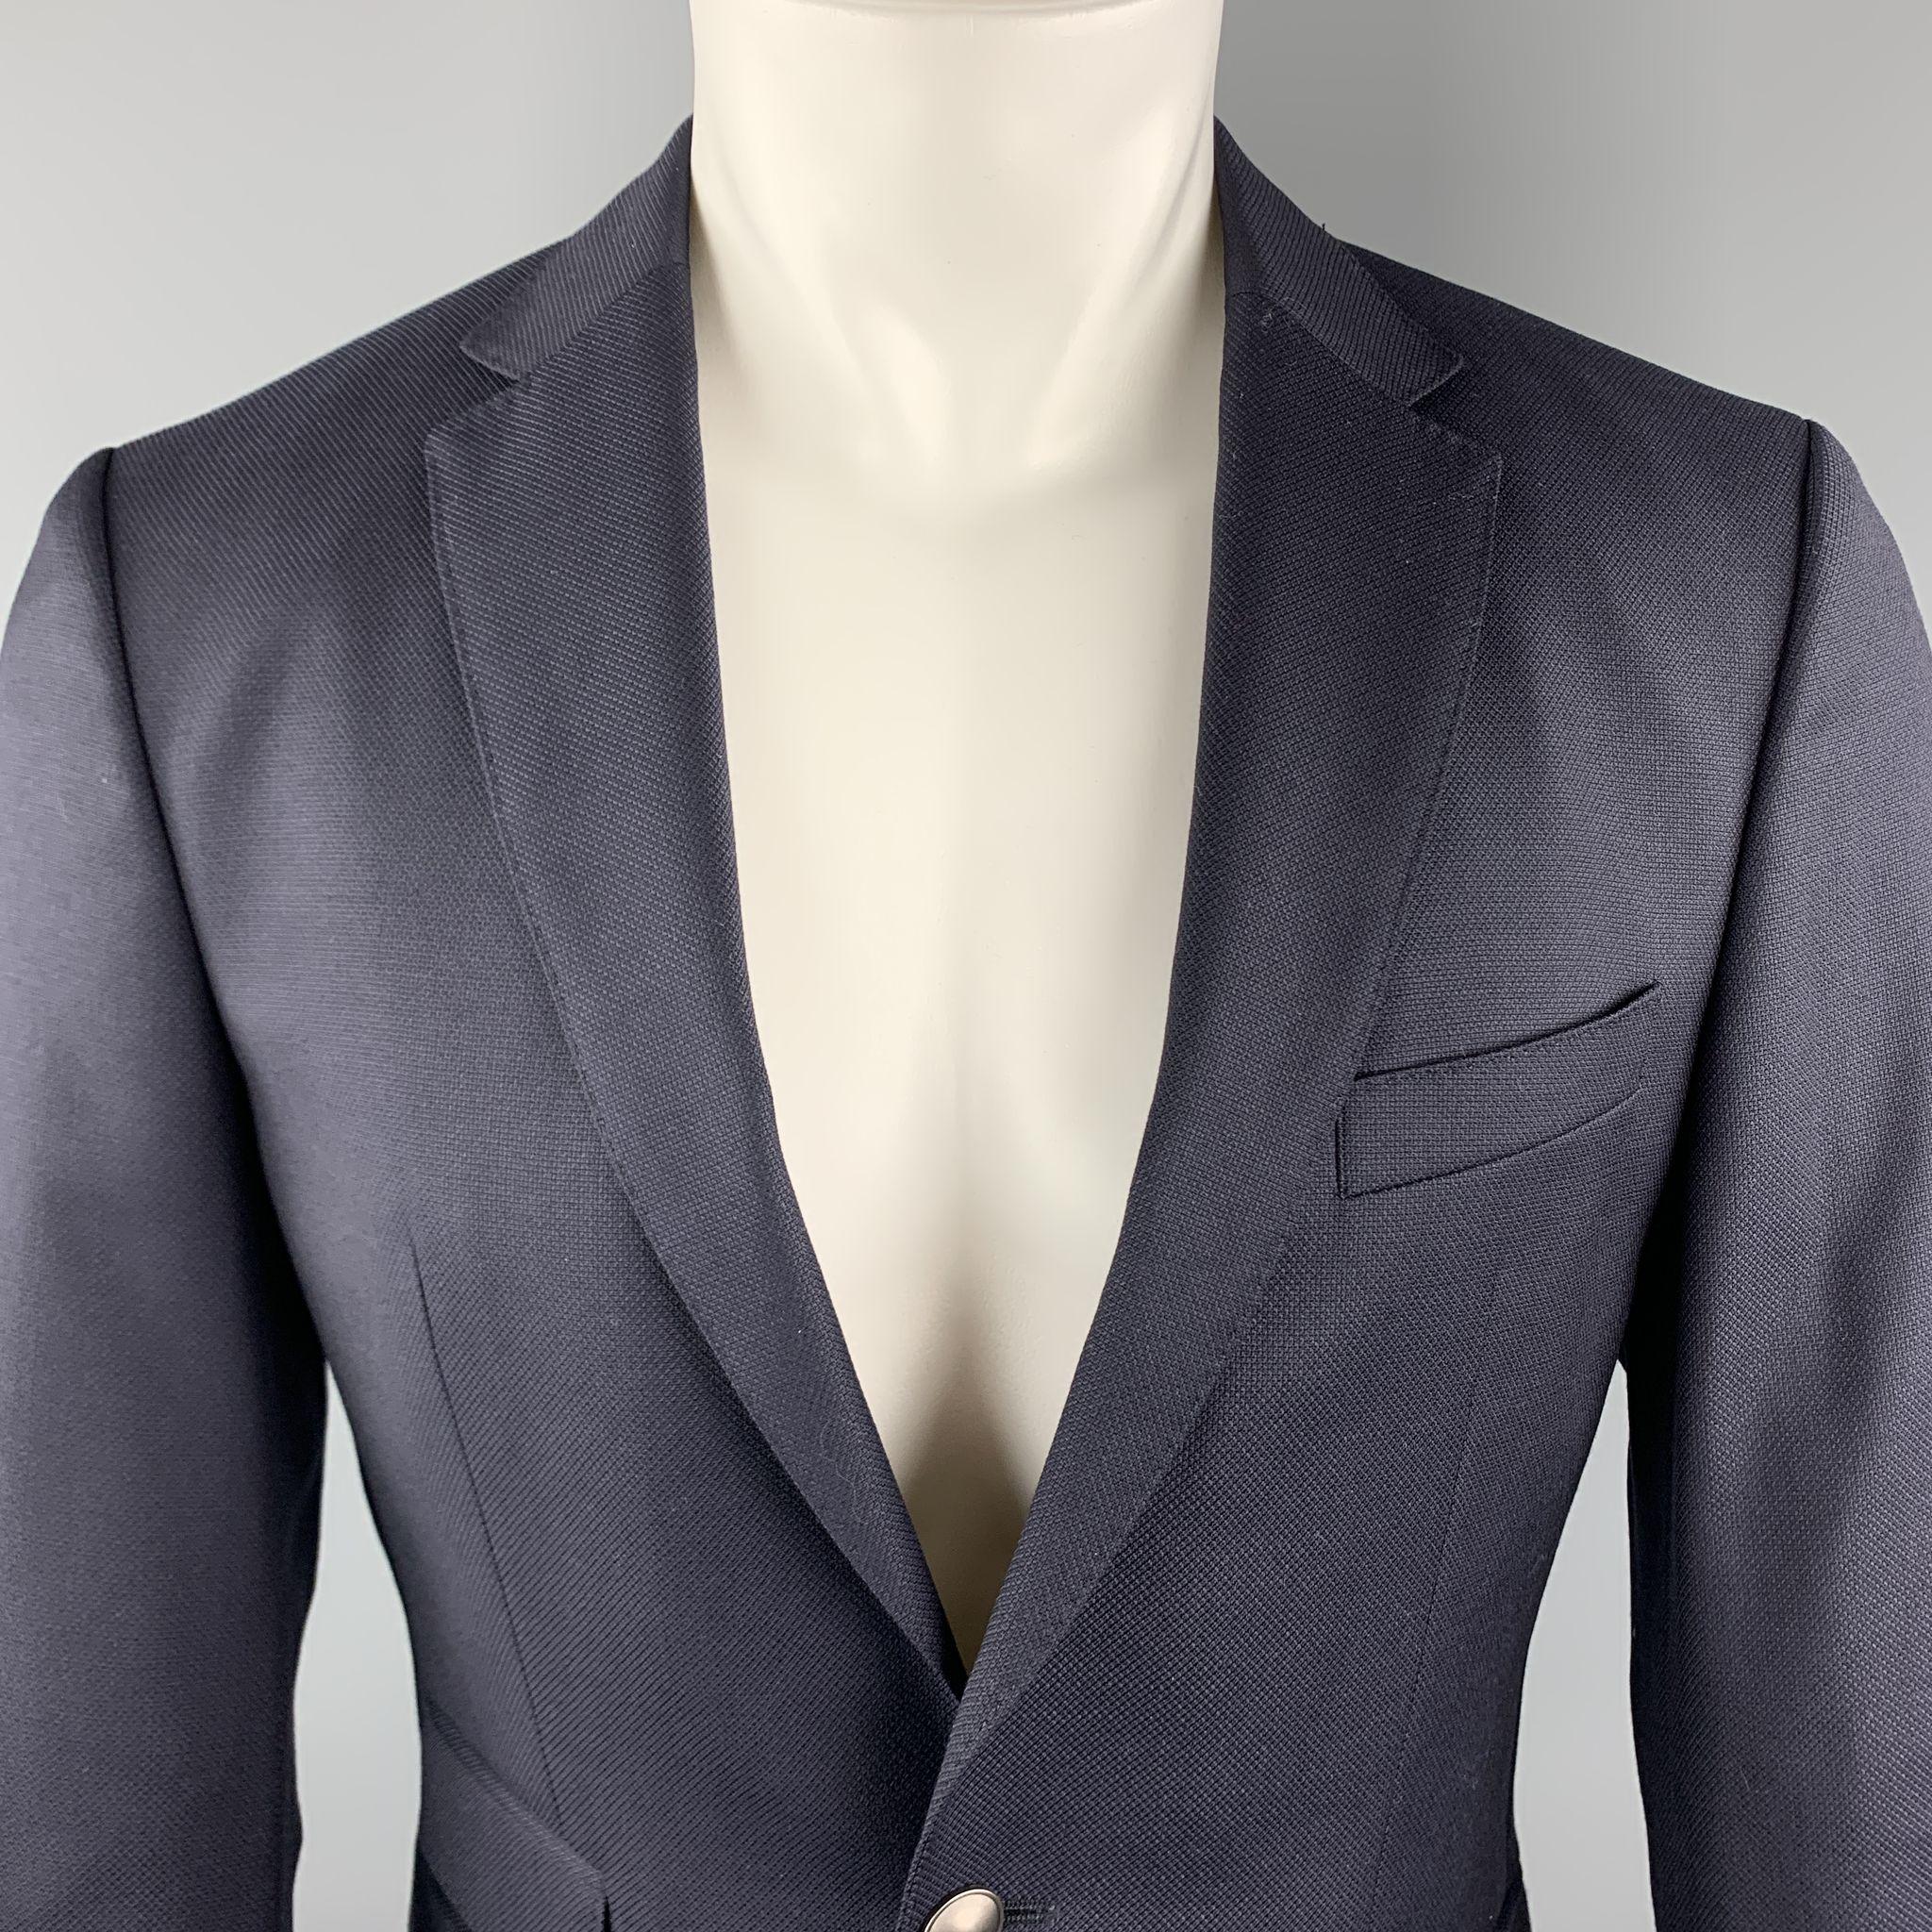 HUGO BOSS Sport Coat comes in a navy woven wool featuring a notch lapel style, flap pockets, and a two button closure. 

Excellent Pre-Owned Condition.
Marked: 46

Measurements:

Shoulder: 17 in. 
Chest: 36 in. 
Sleeve: 25 in. 
Length: 28 in. 

SKU: